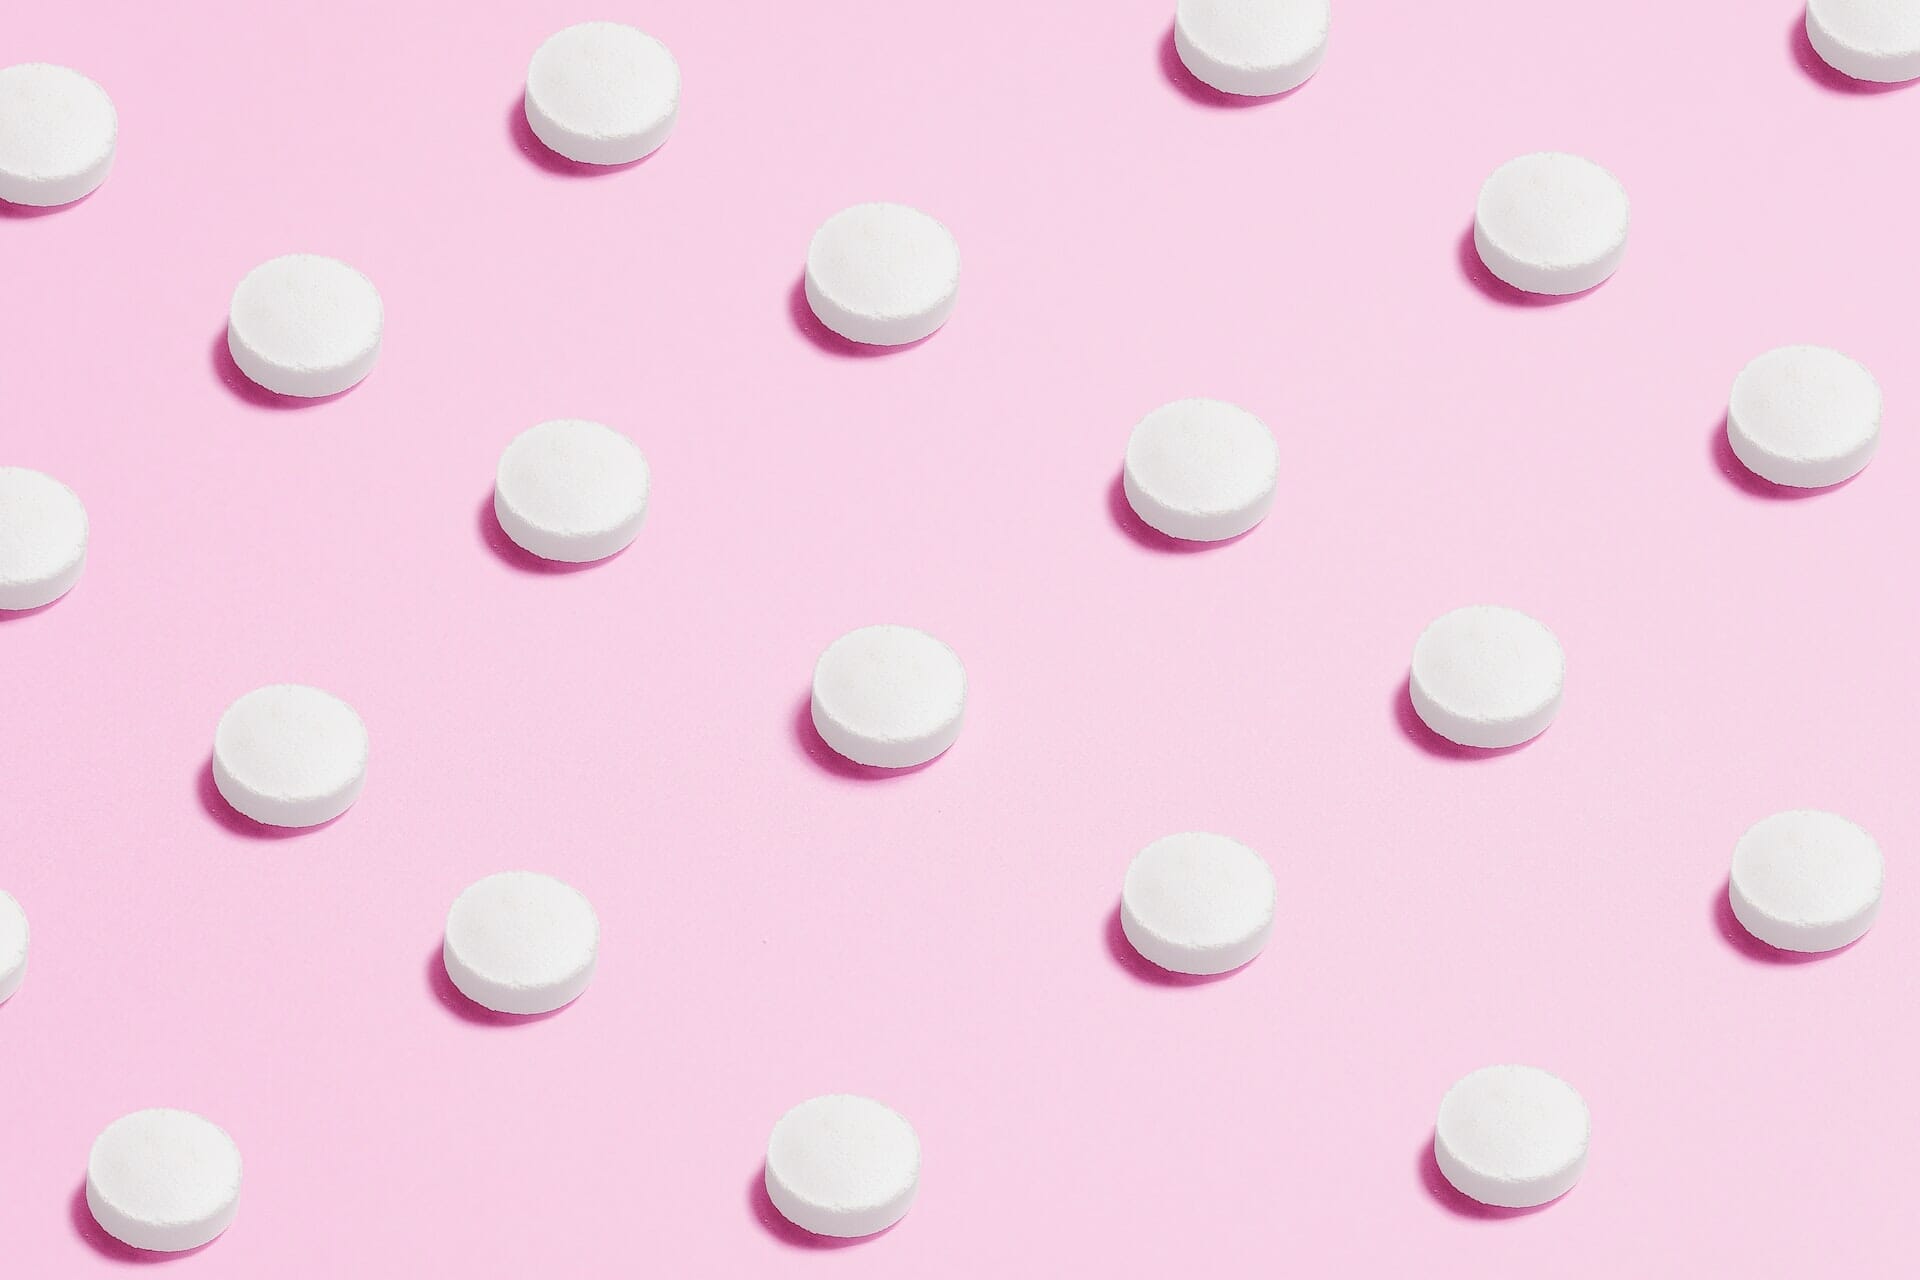 Small, round white pills on a pink background